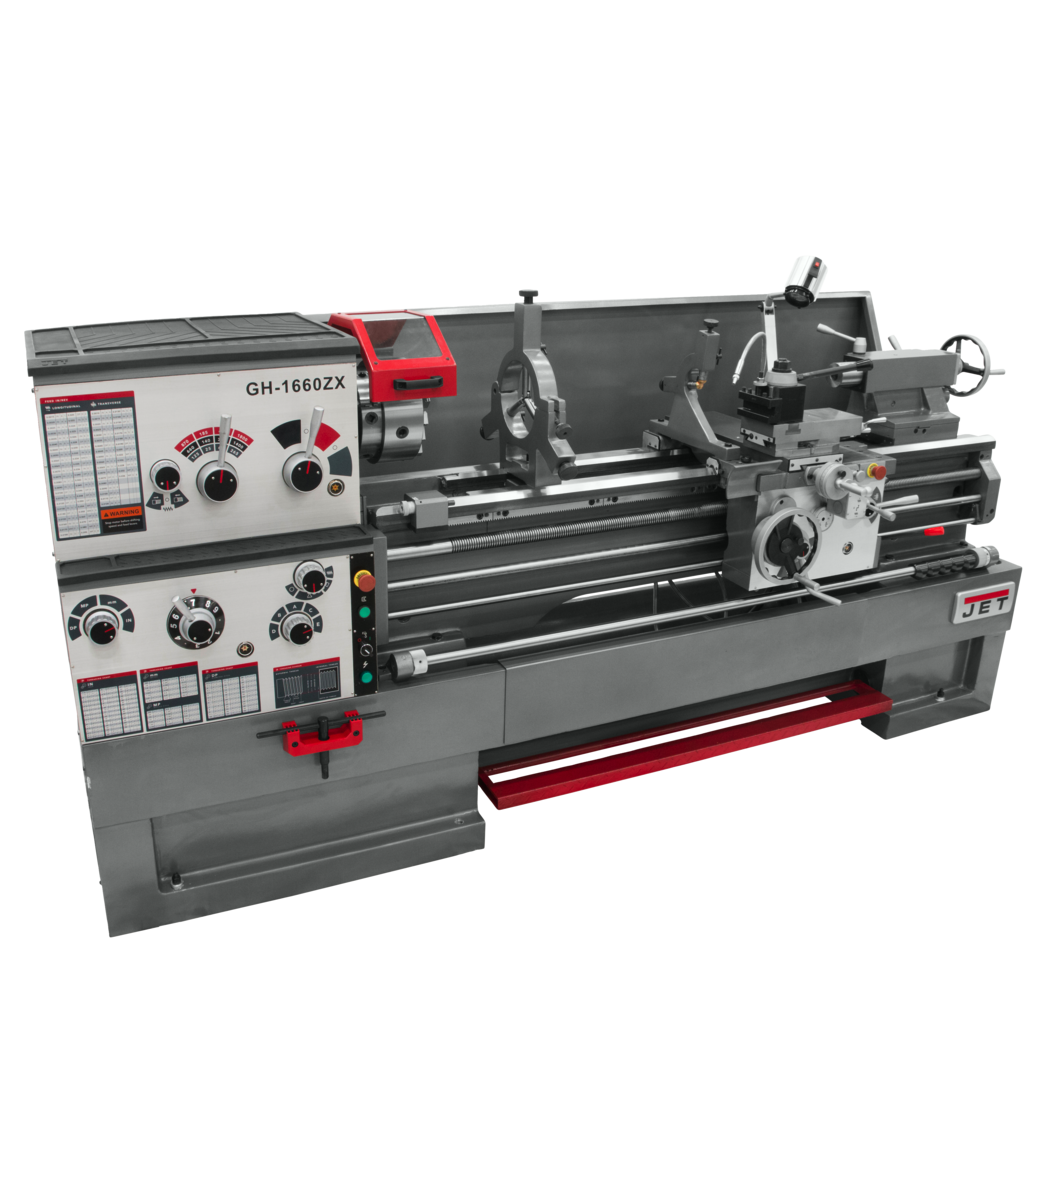 321543, GH-1660ZX Lathe with 2-axis ACU-RITE 203 & Taper Attachment Installed, Jet, Metalworking, Turning, Lathes